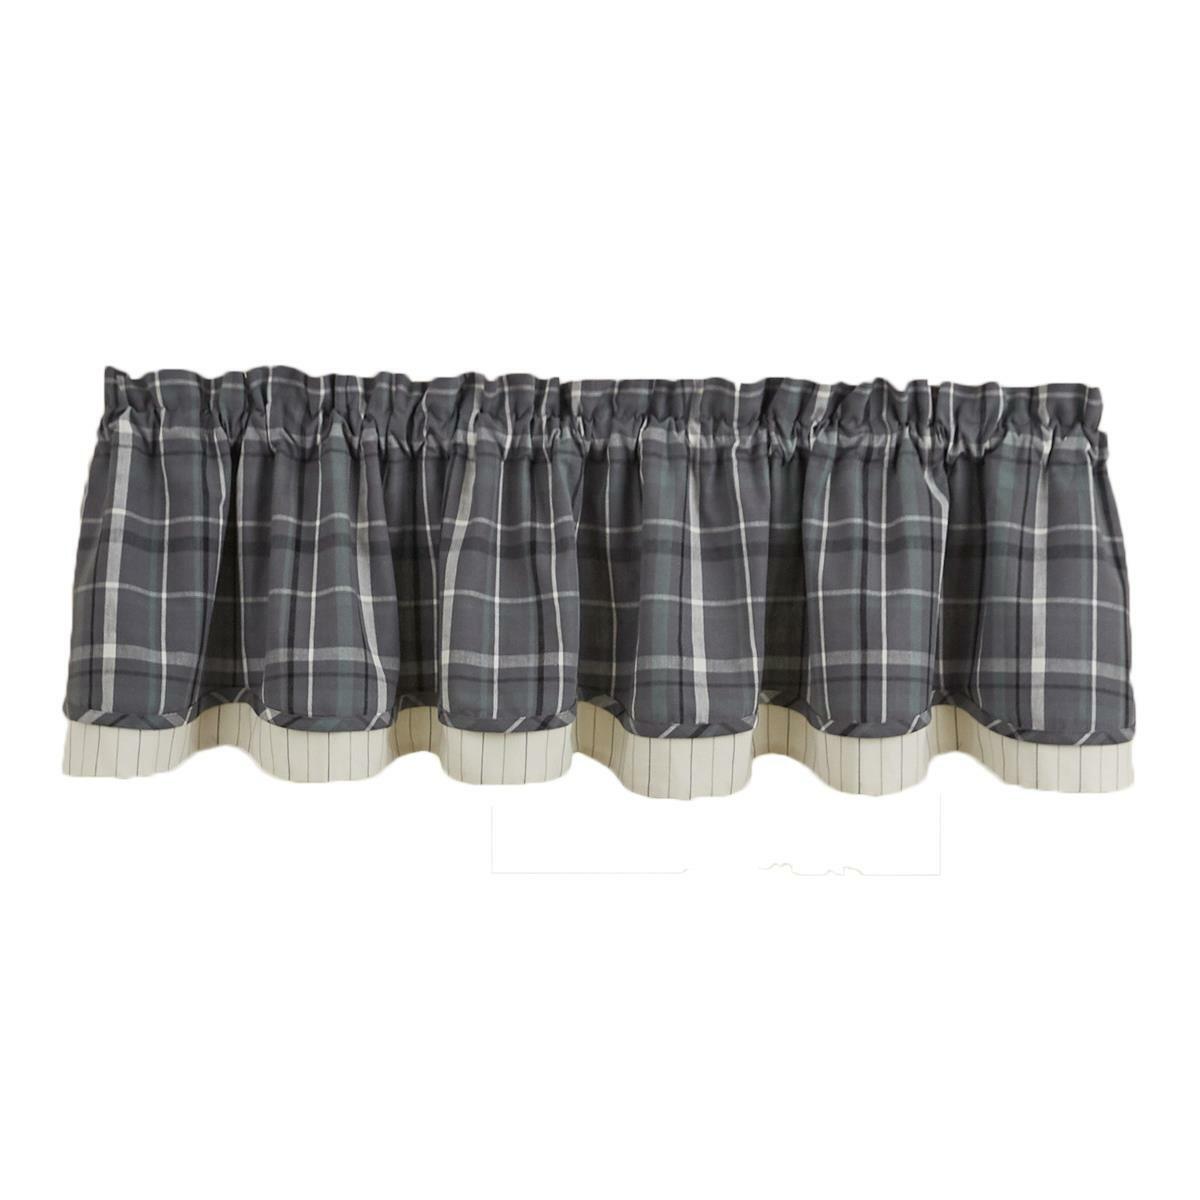 Beaumont Plaid Valance - Lined Layered Park Designs